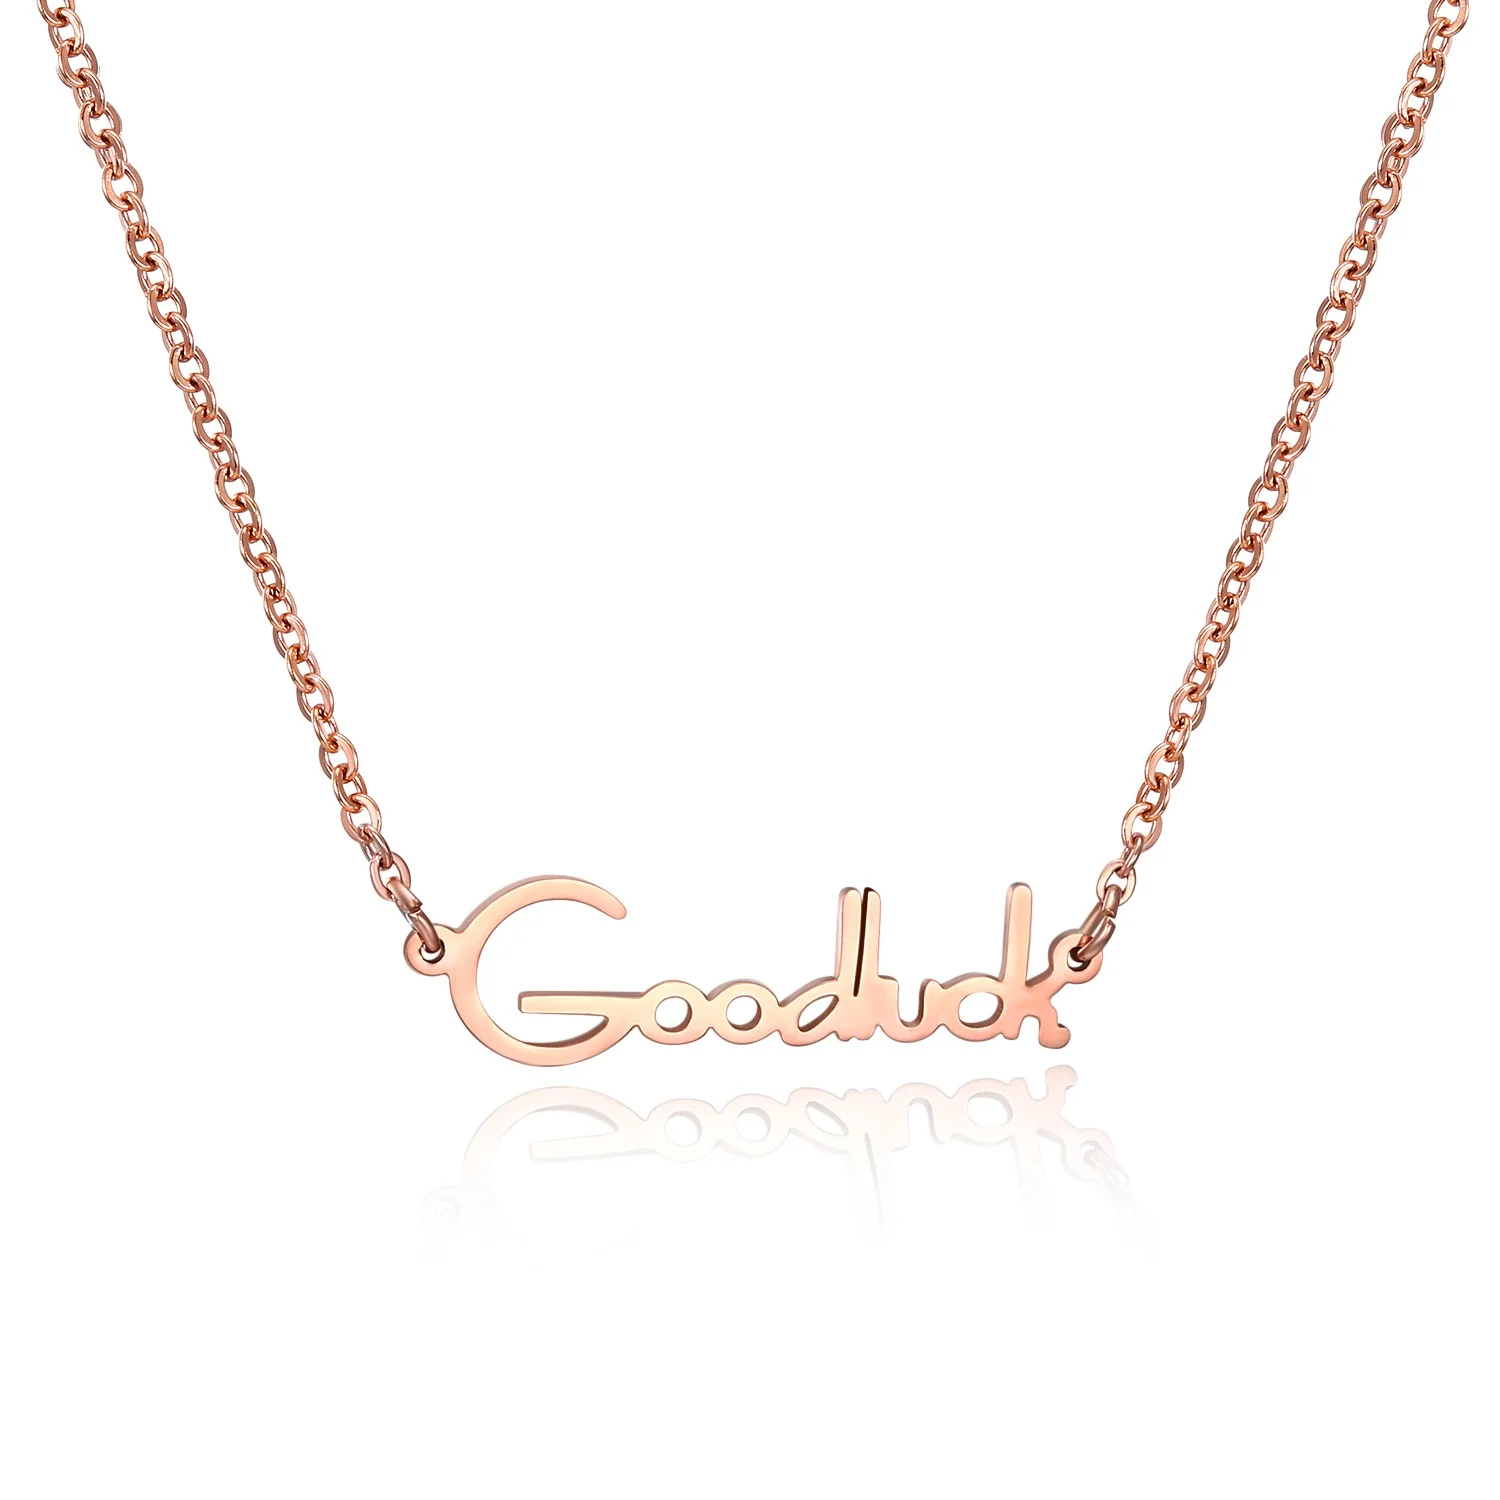 

Gorgeous 2020 Wholesale New Fancy Titanium Jewelry Good Luck Goodluck Letter Statement Rose Gold Plated Stainless Steel Necklace